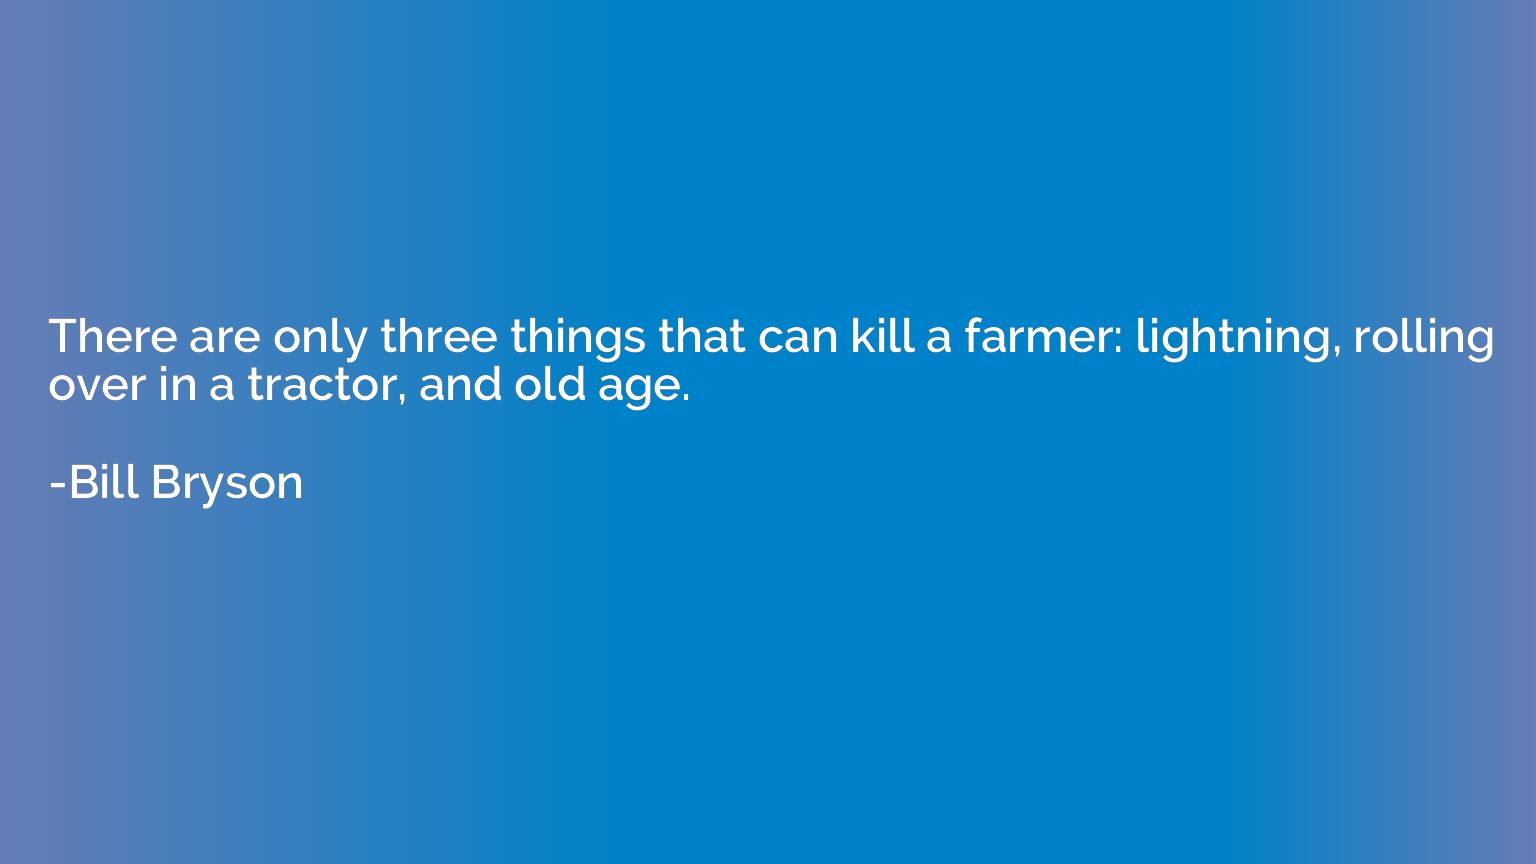 There are only three things that can kill a farmer: lightnin